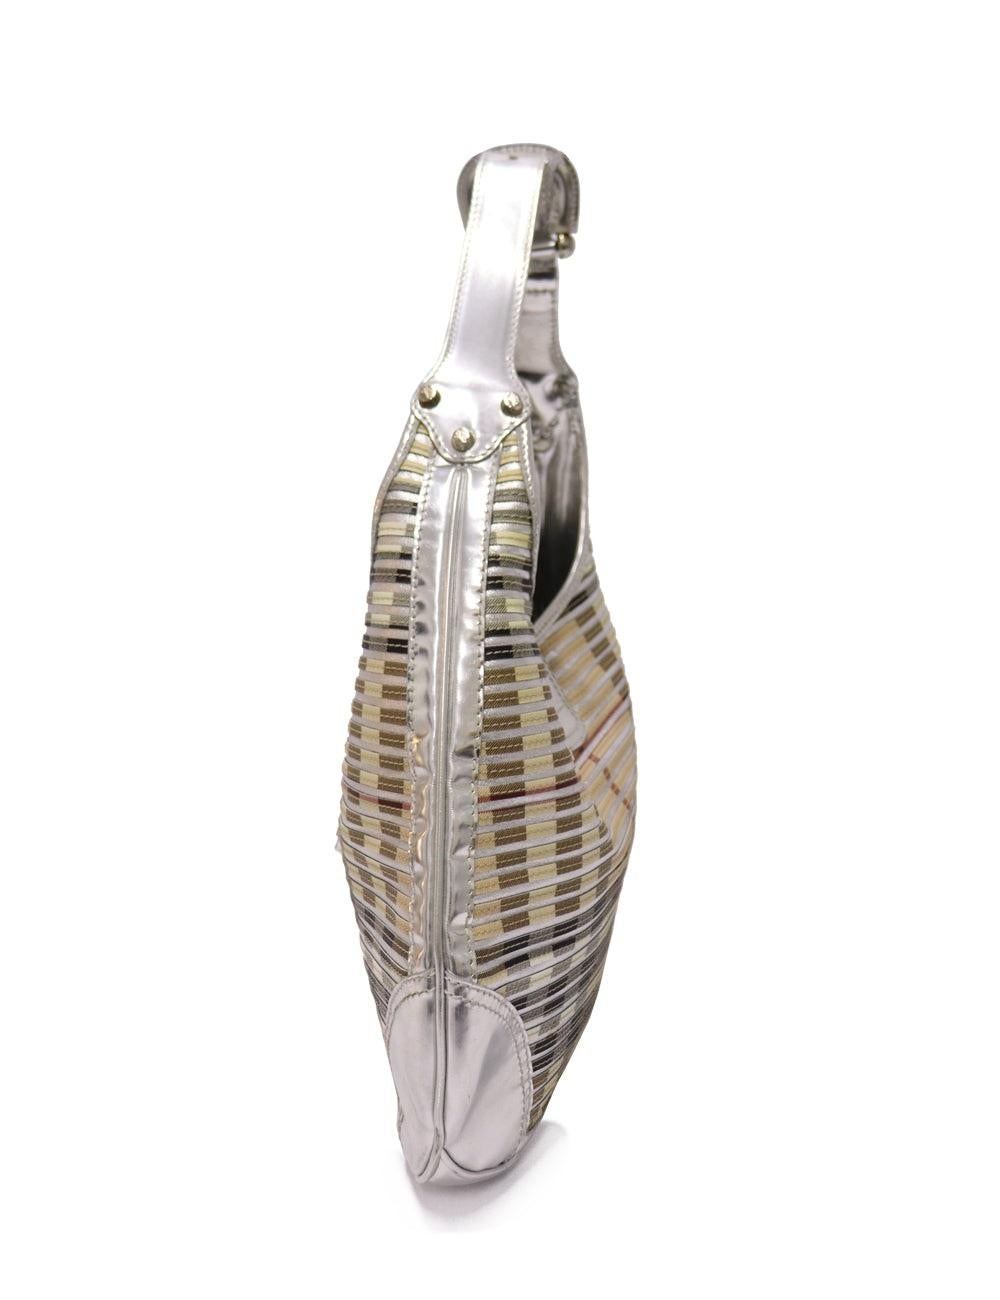 Burberry Silver Metallic Striped shoulder bag.

Additional information:
Material: Leather
Hardware: Silver
Measurements: 41 L x 7 D x 26 H cm
Handle Drop: 26 cm
Overall condition: Excellent
Interior Condition: Signs of use
Exterior Condition: A